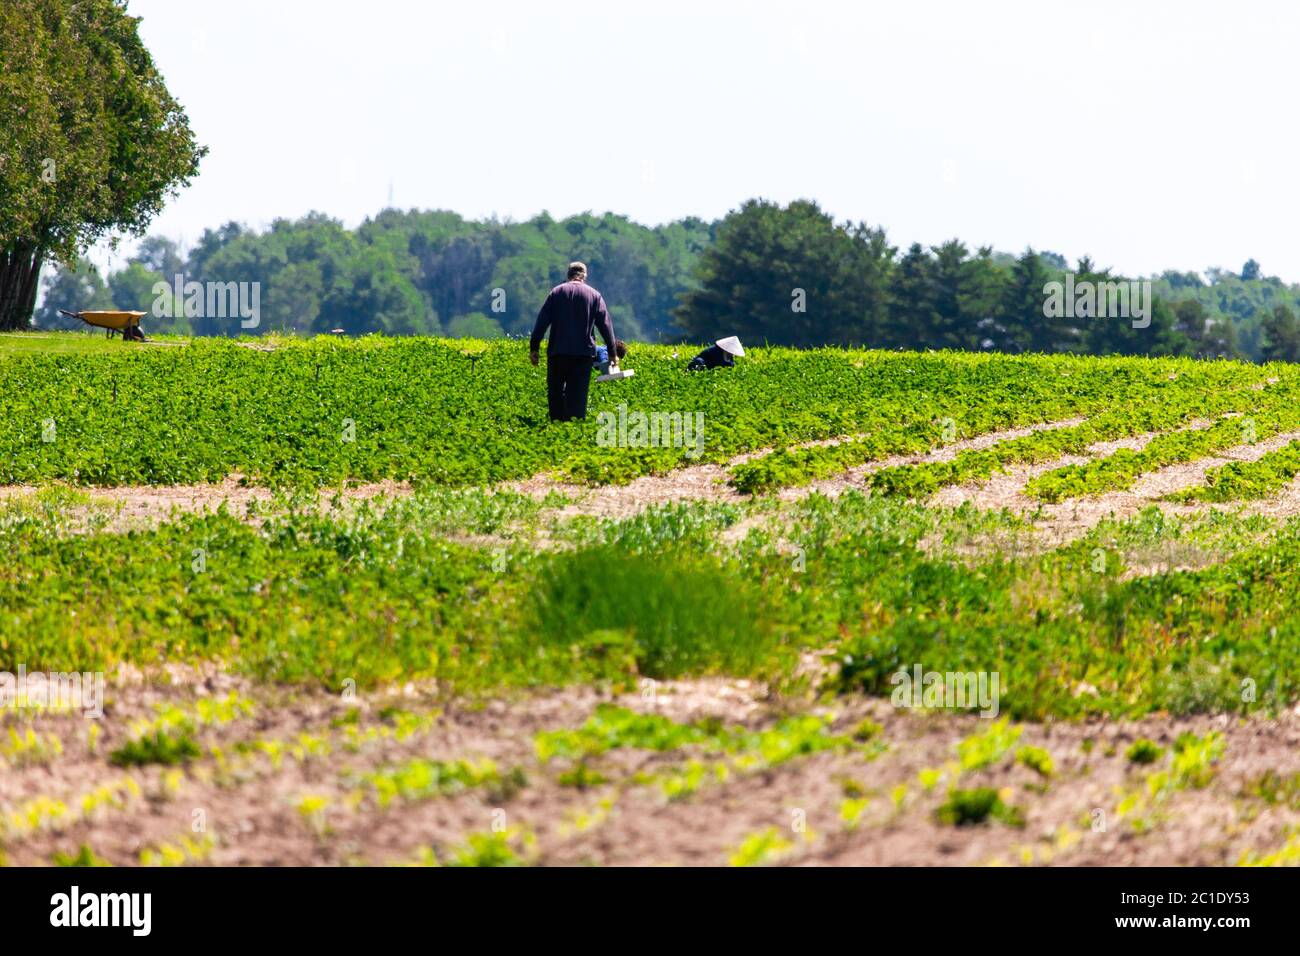 Talbotville, Canada - June 15, 2020. June in Southwestern Ontario means the start of Strawberry season. Farm workers and customers pick strawberries from an orchard in Southwestern Ontario. Mark Spowart/Alamy Live News Stock Photo